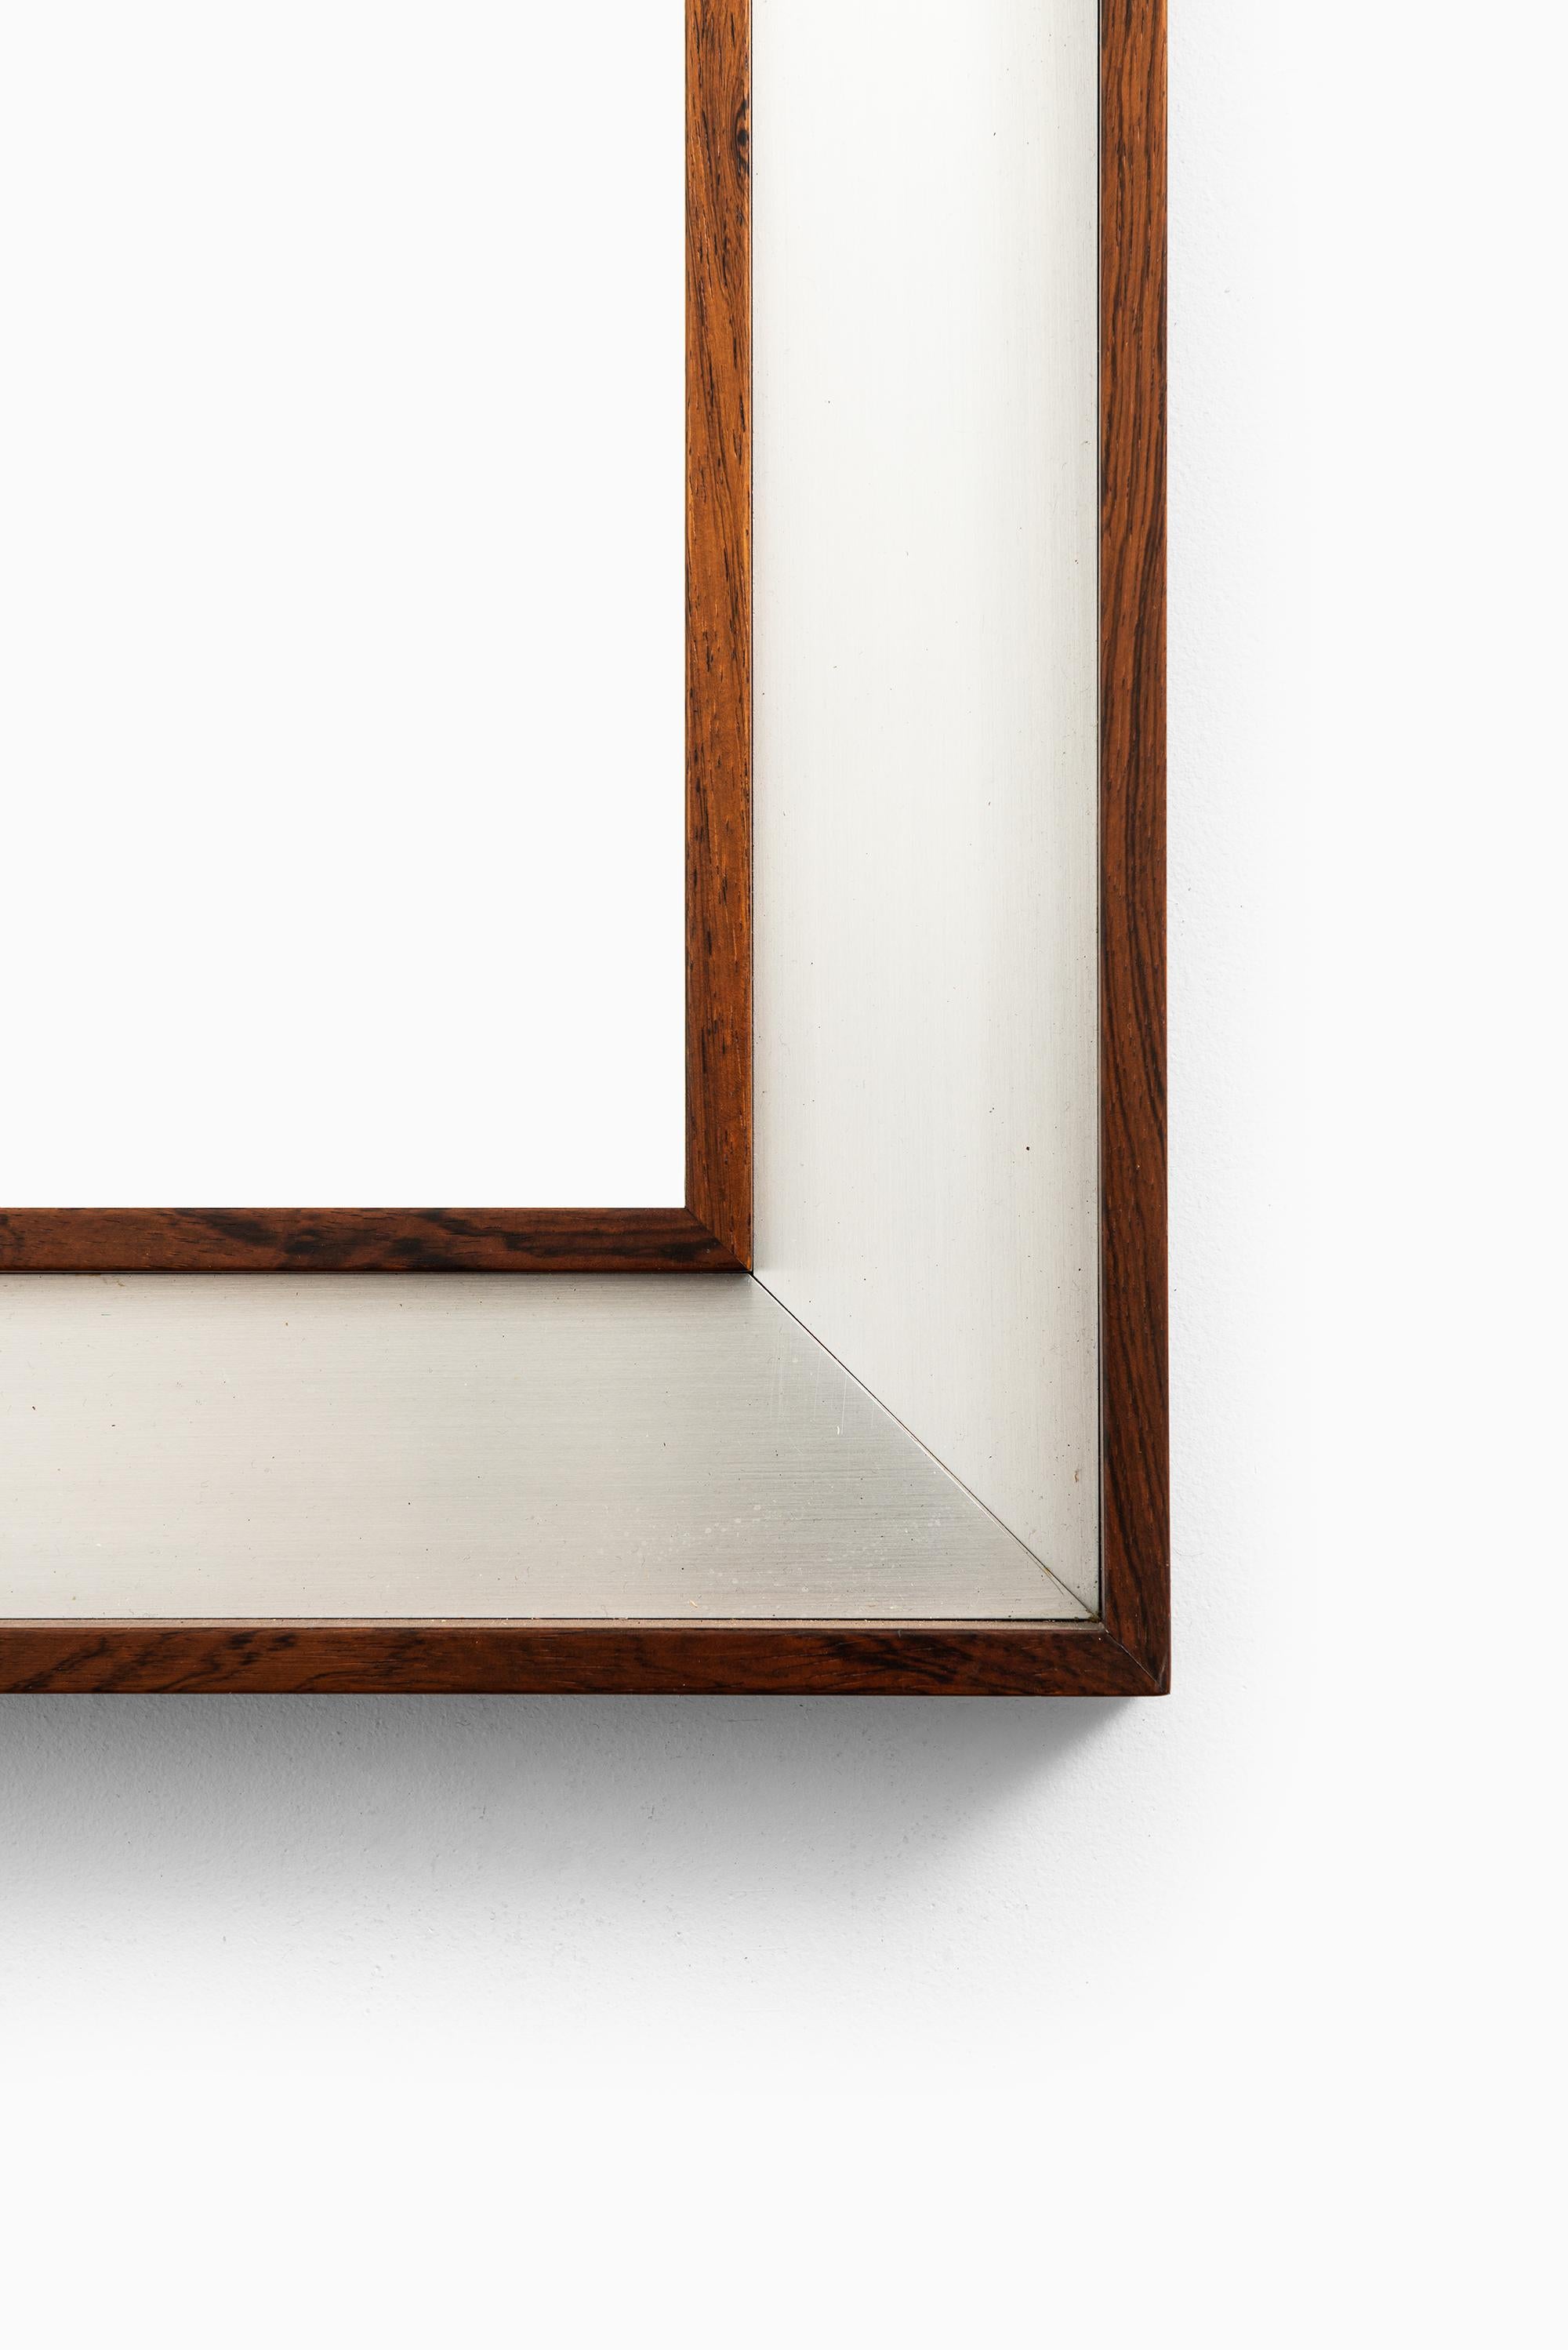 Large rosewood mirror with aluminium frame. Produced by Fröseke in Sweden.